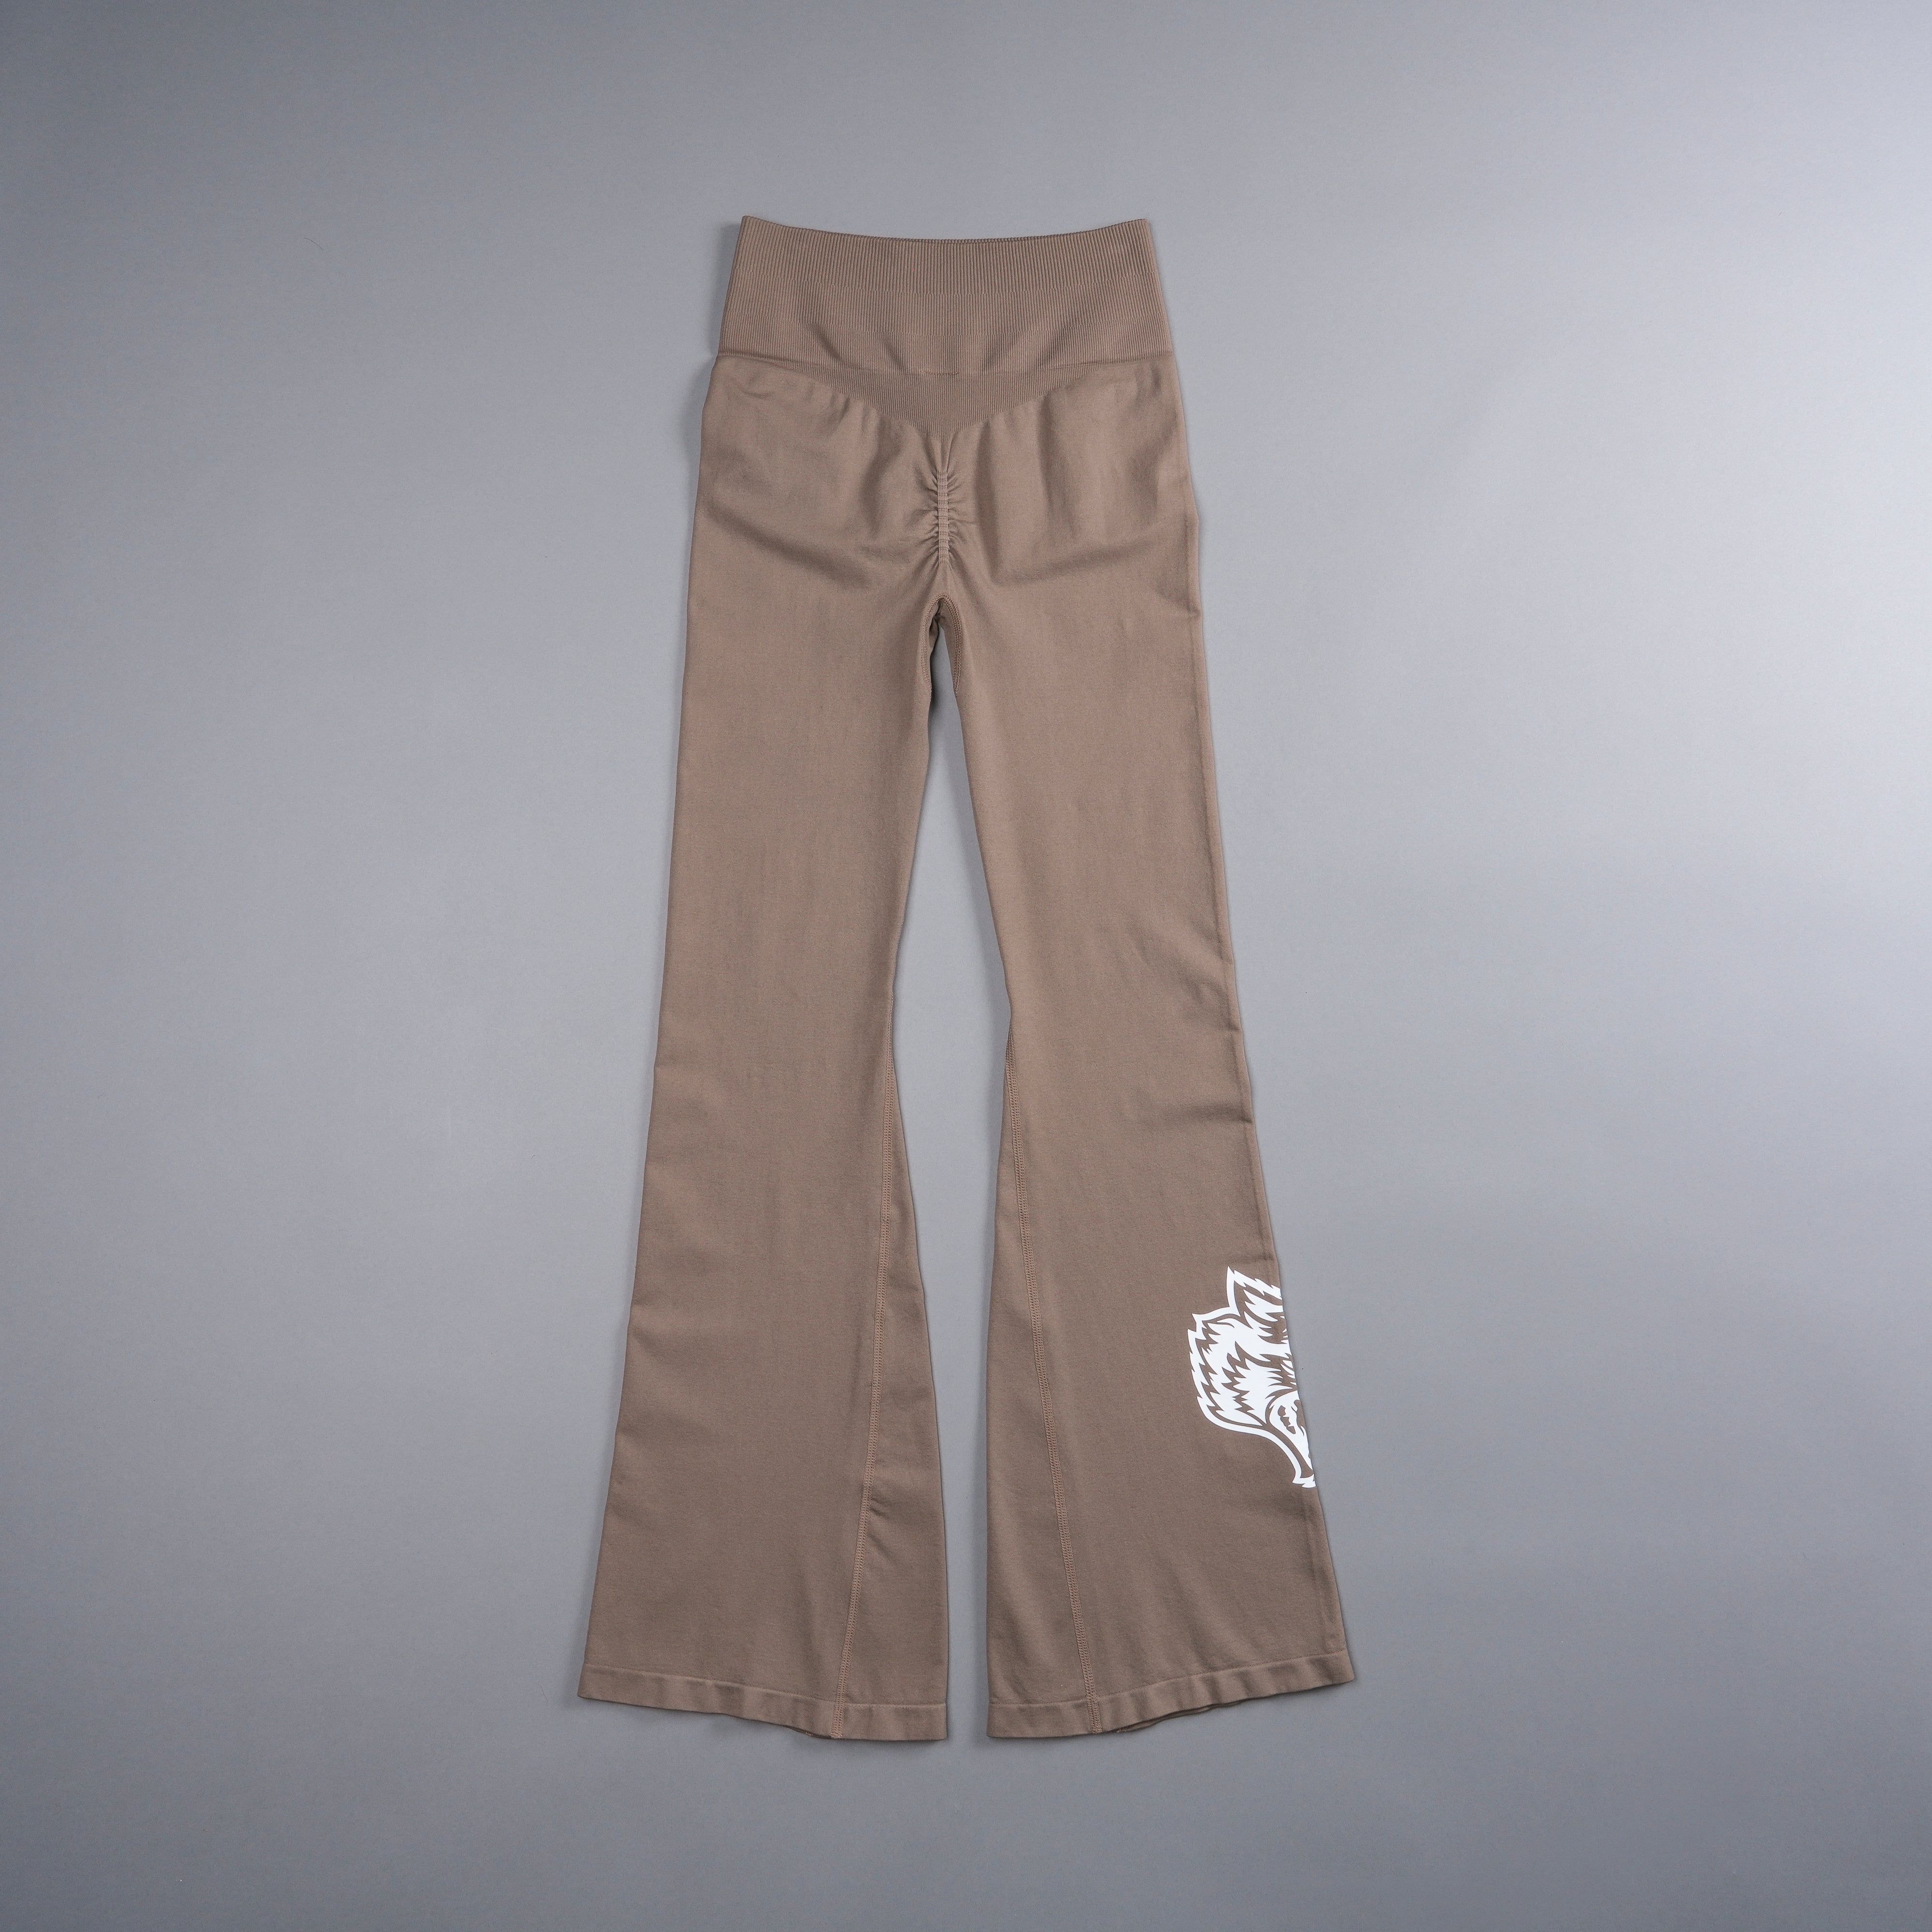 Western Wolves "Everson Seamless" Gracie Flare Scrunch Leggings in Mojave Brown